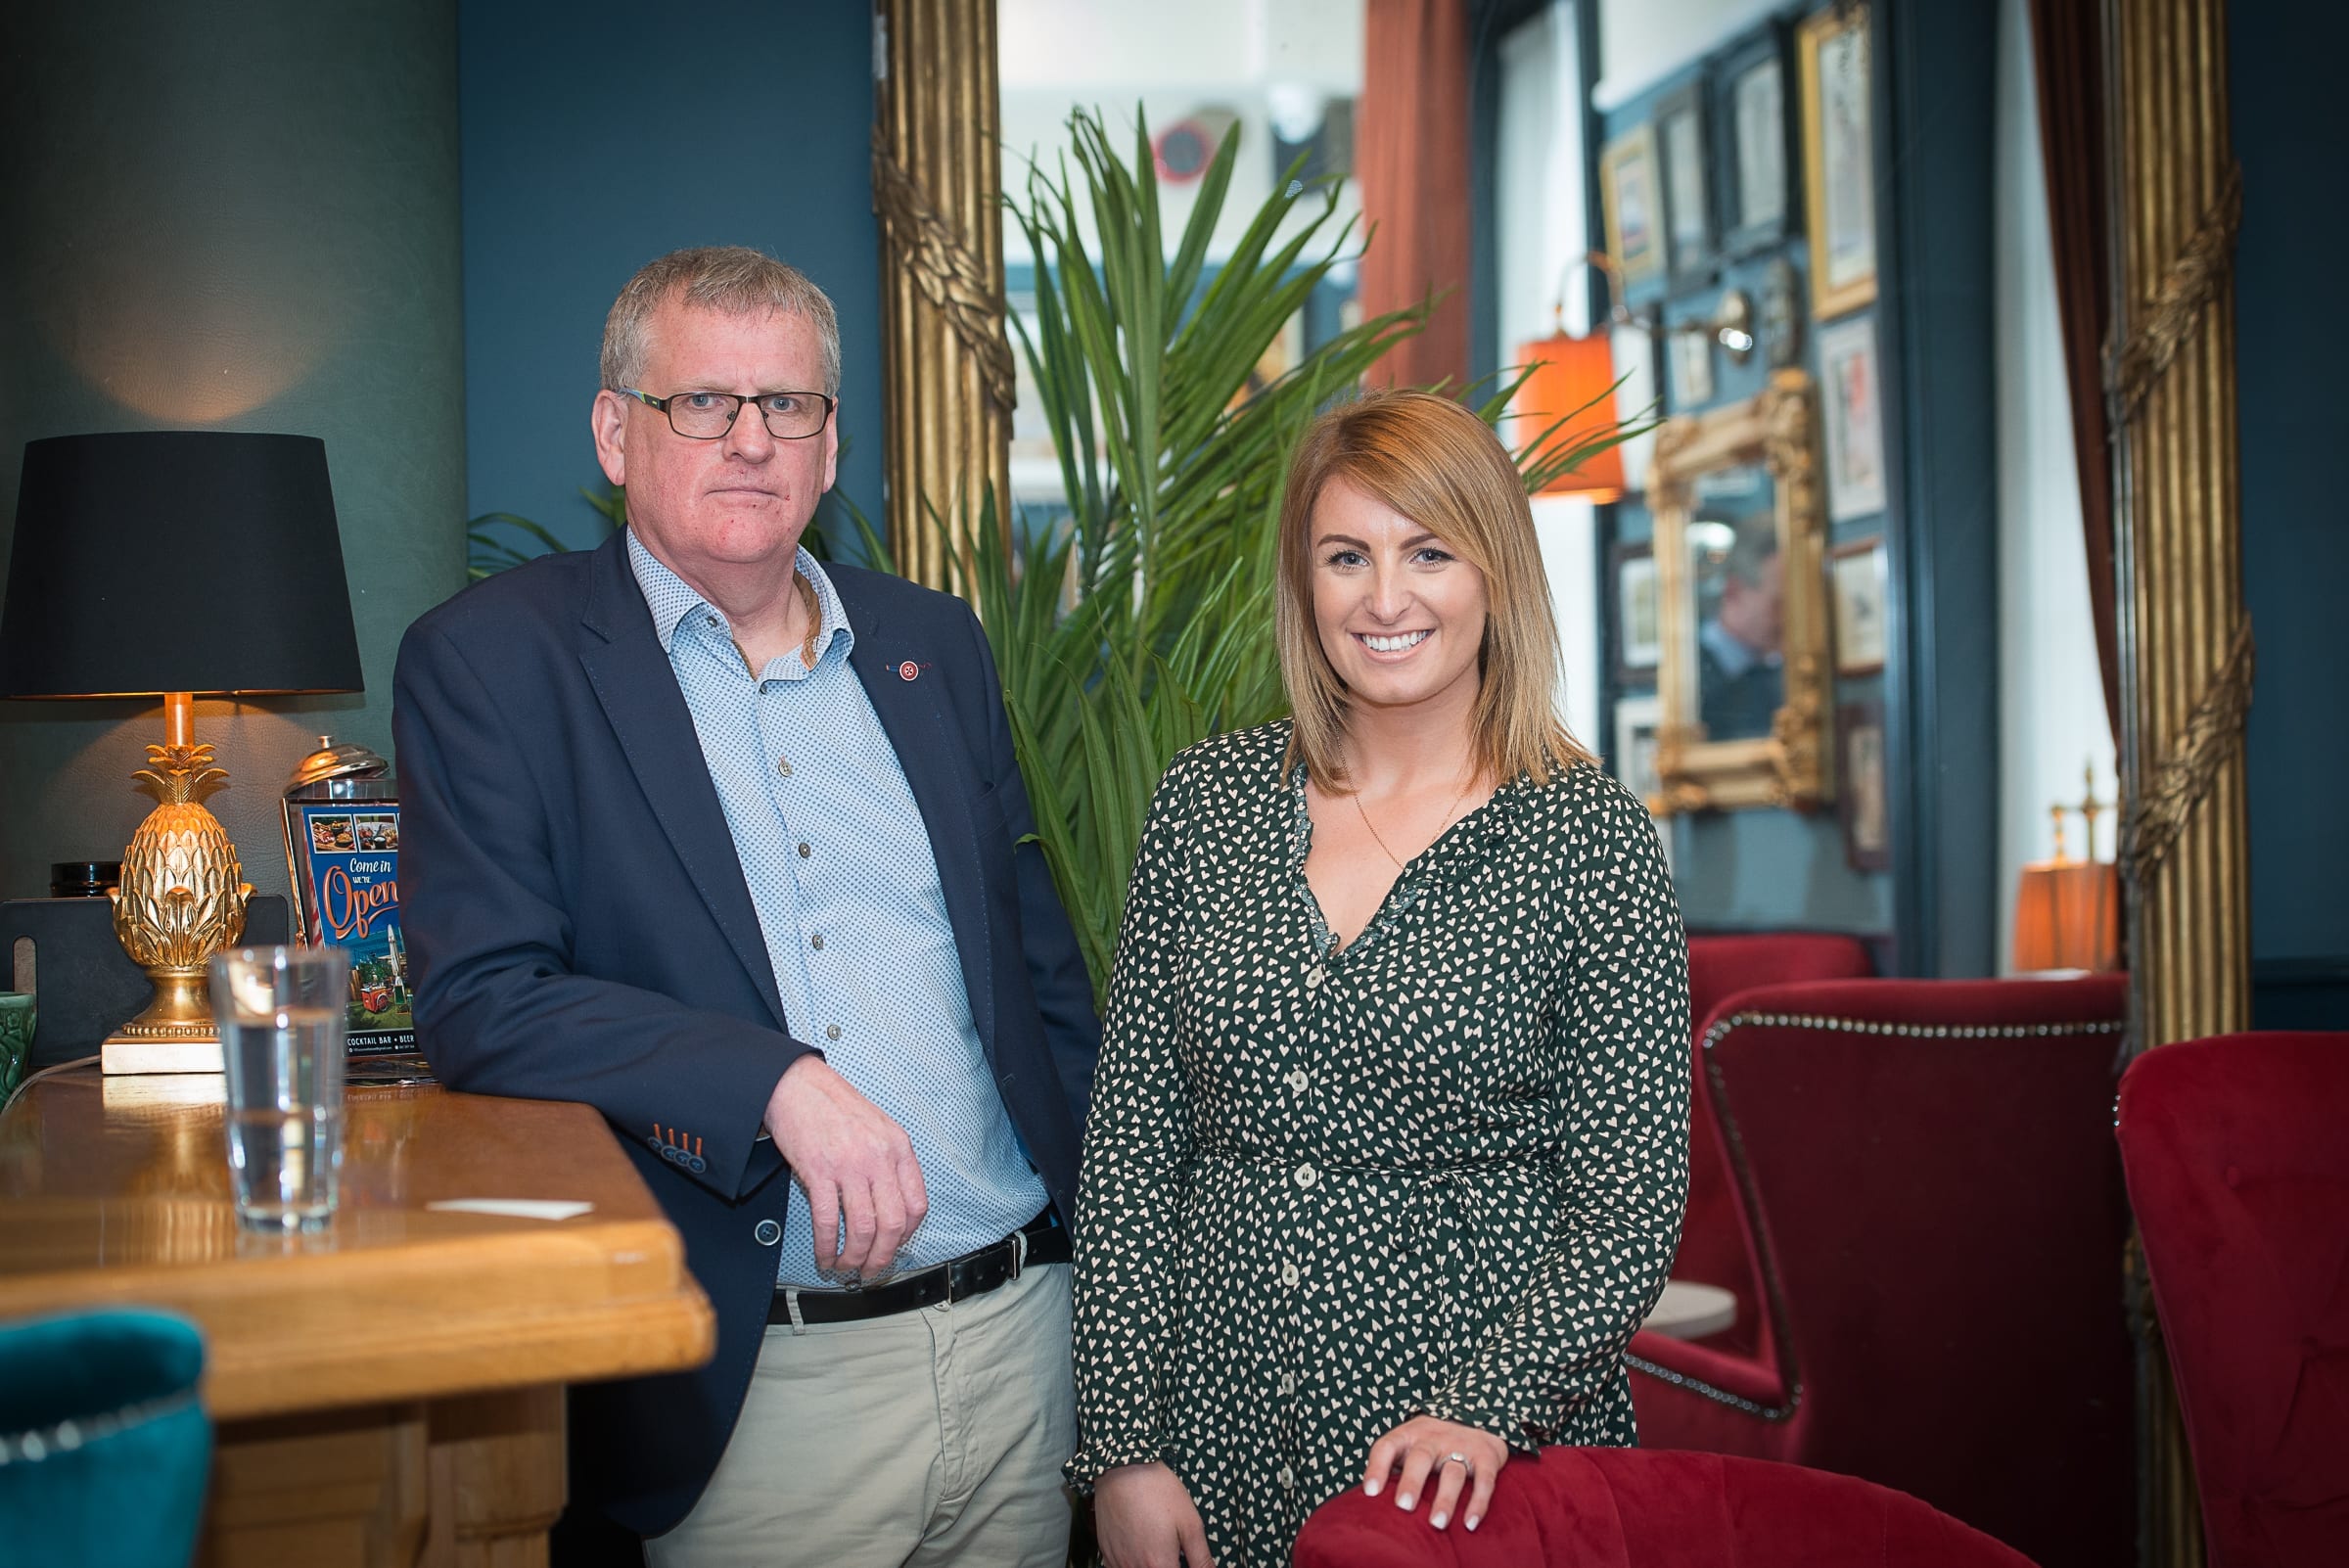 No repro fee: Networking with a Difference held in 101 O’Connell Street. Facilitated by Stephen Pitcher.  23-05-2019, From Left to Right: Stephen Pitcher- Facilitator / Stephen Pitcher.ie, Michelle O’Connor - Employability Limerick
Photo credit Shauna Kennedy